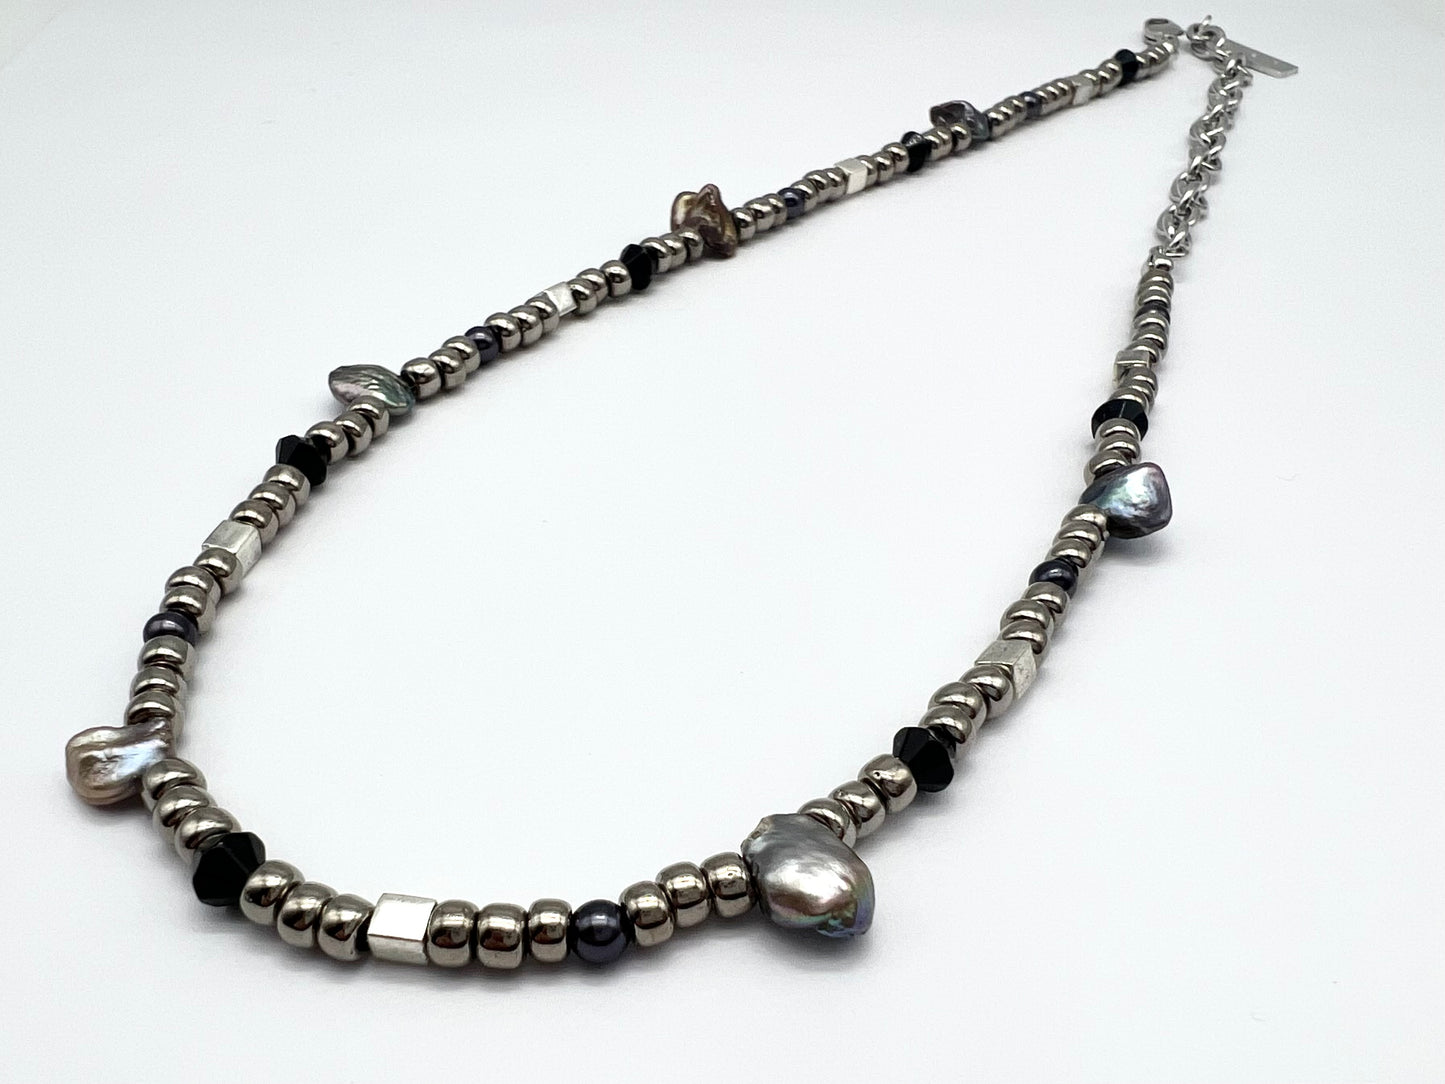 Glass bead pearl mix necklace - BK